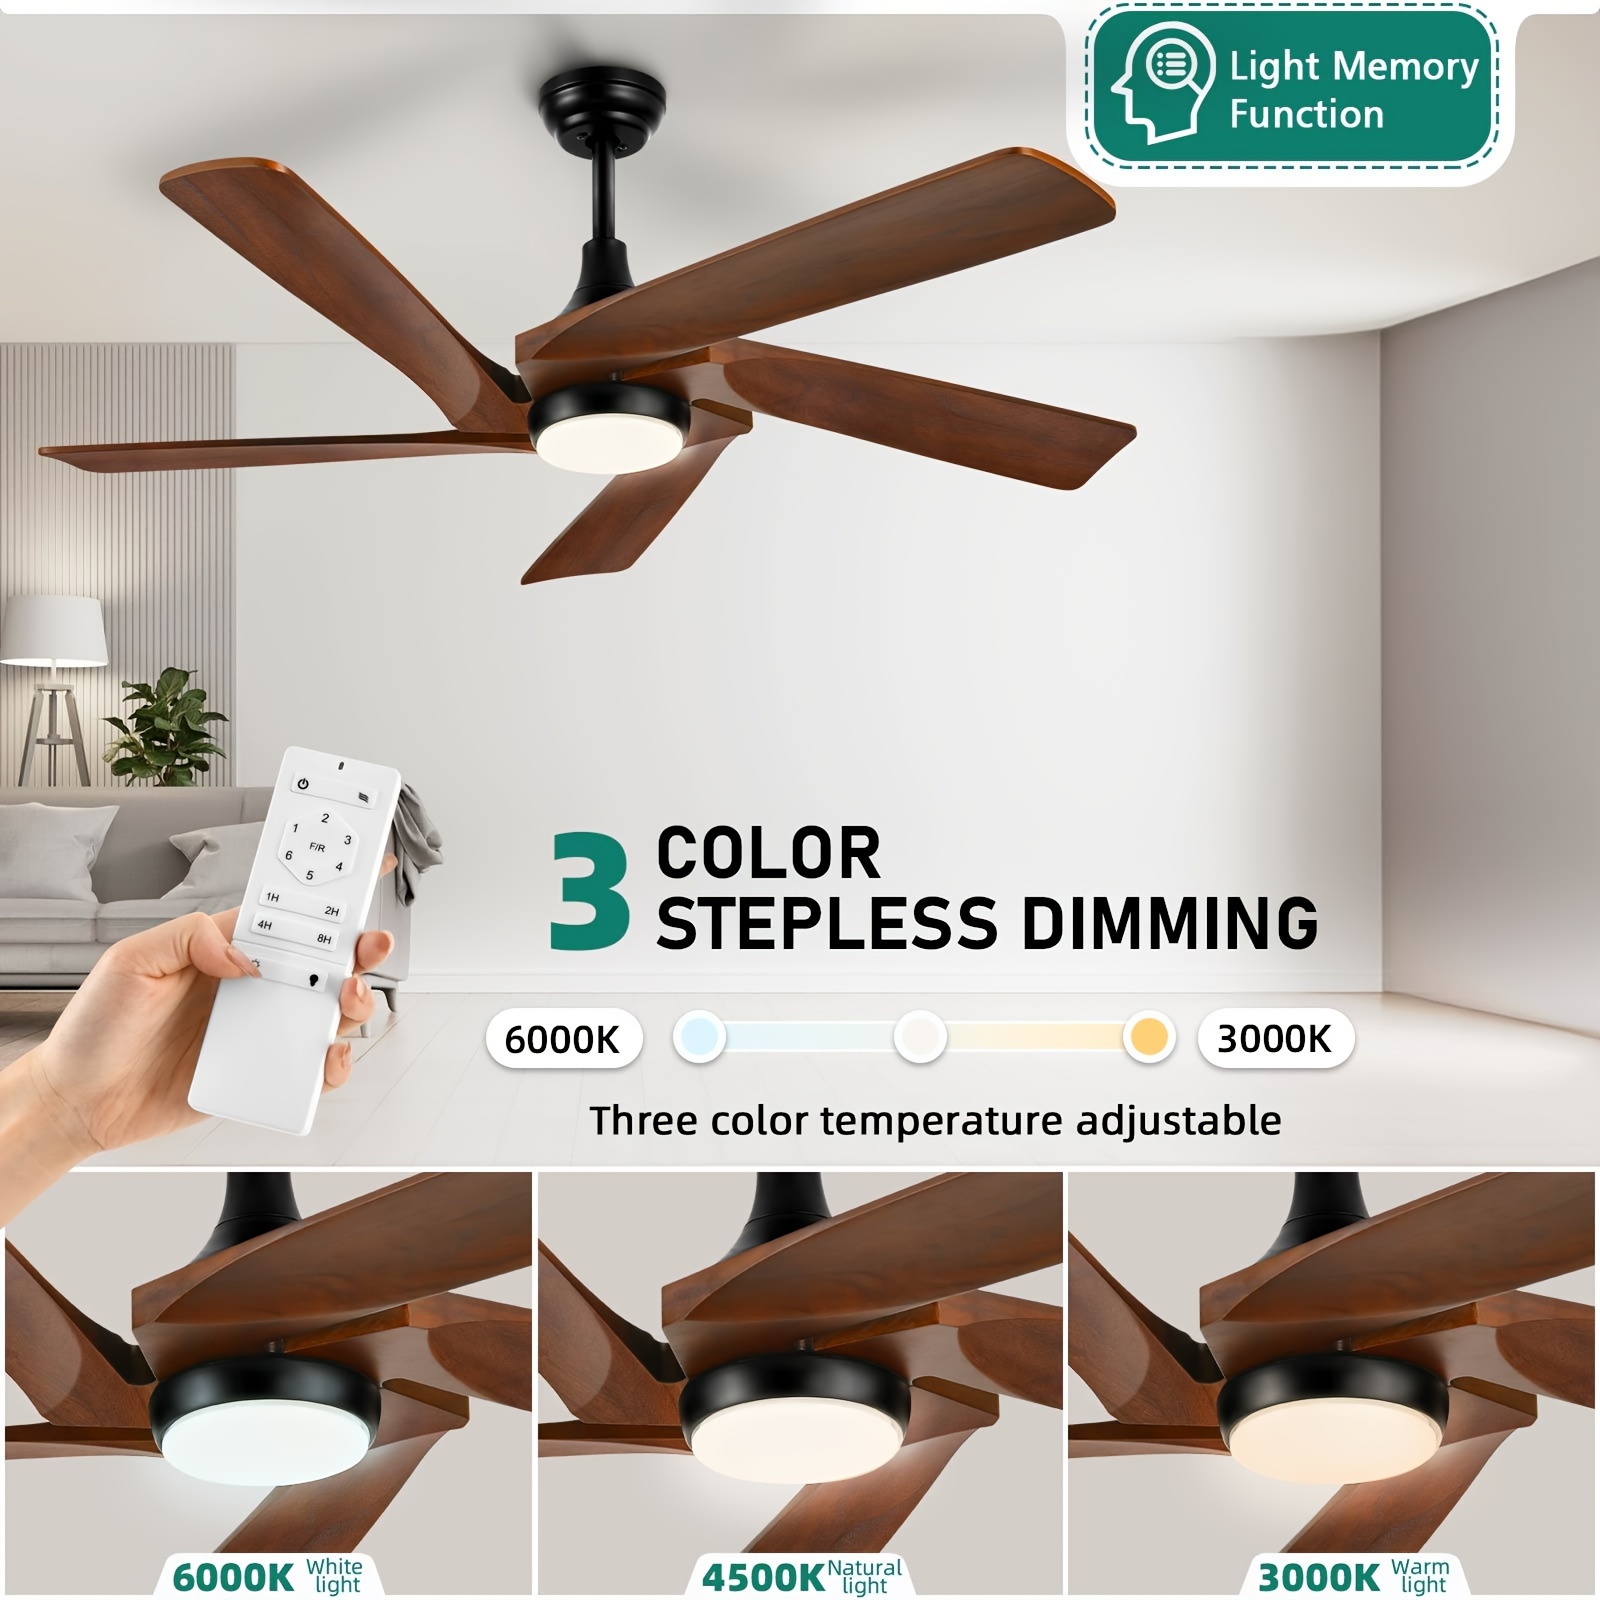 

Dwvo 52 Inch Ceiling Fan With Lights Remote Control, Dimmable 3-color Led Ceiling Fan With 5 Solid Wood Blades, Modern Ceiling Fan For Indoor Outdoor With Reversible Quiet Motor